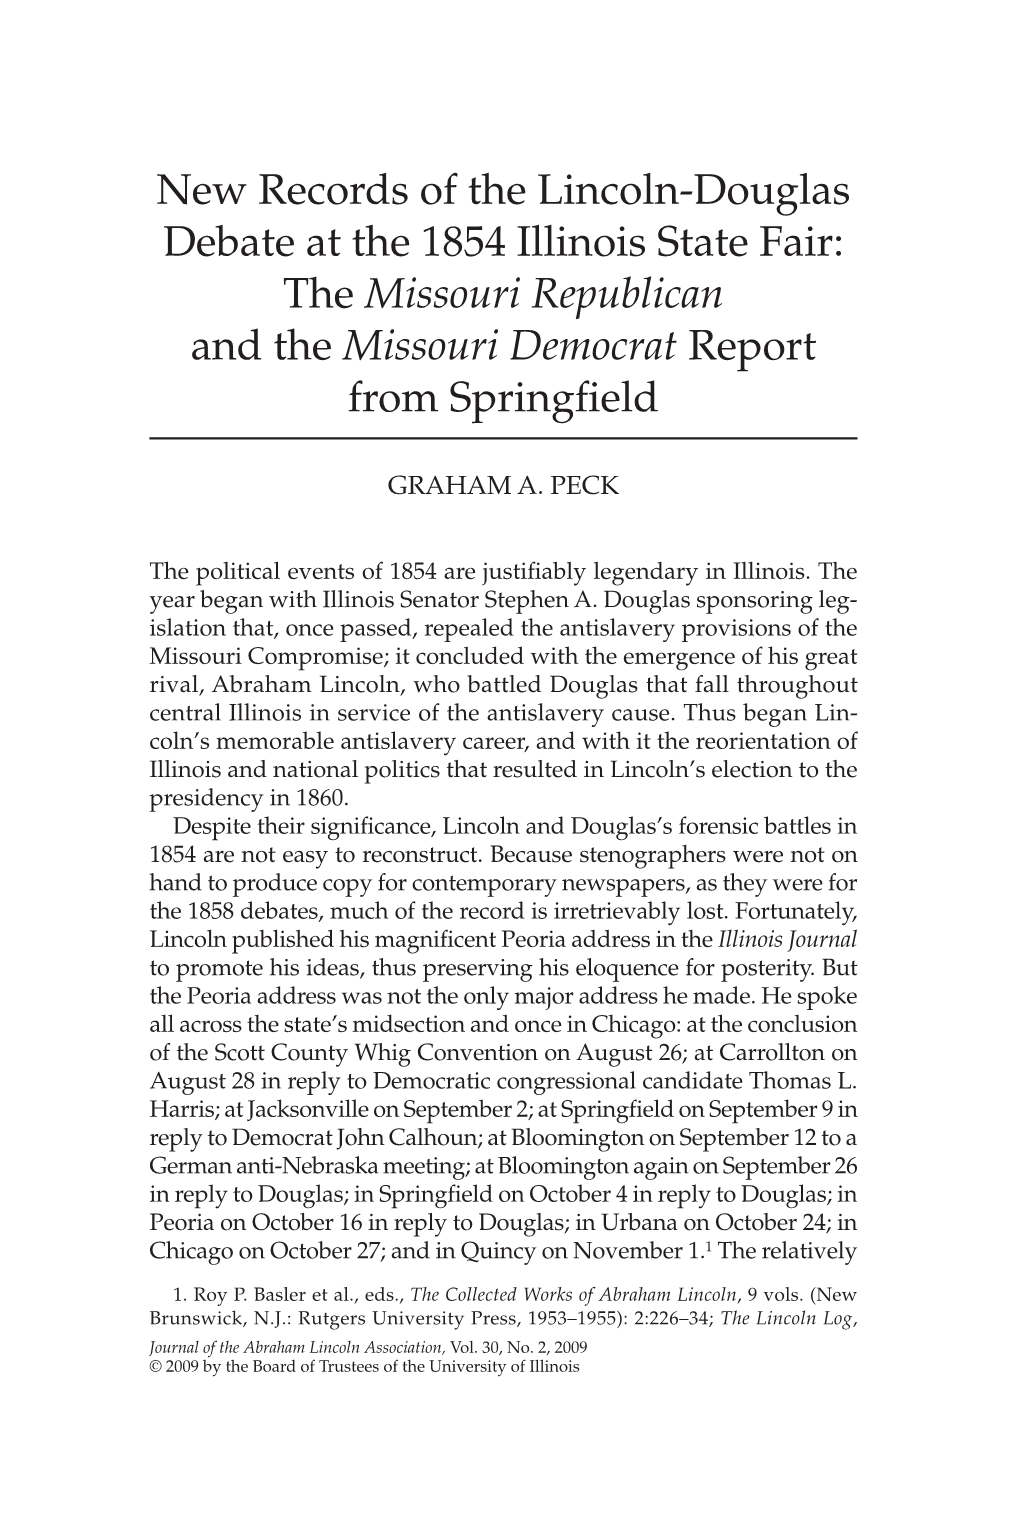 New Records of the Lincoln-Douglas Debate at the 1854 Illinois State Fair: the Missouri Republican and the Missouri Democrat Report from Springfield